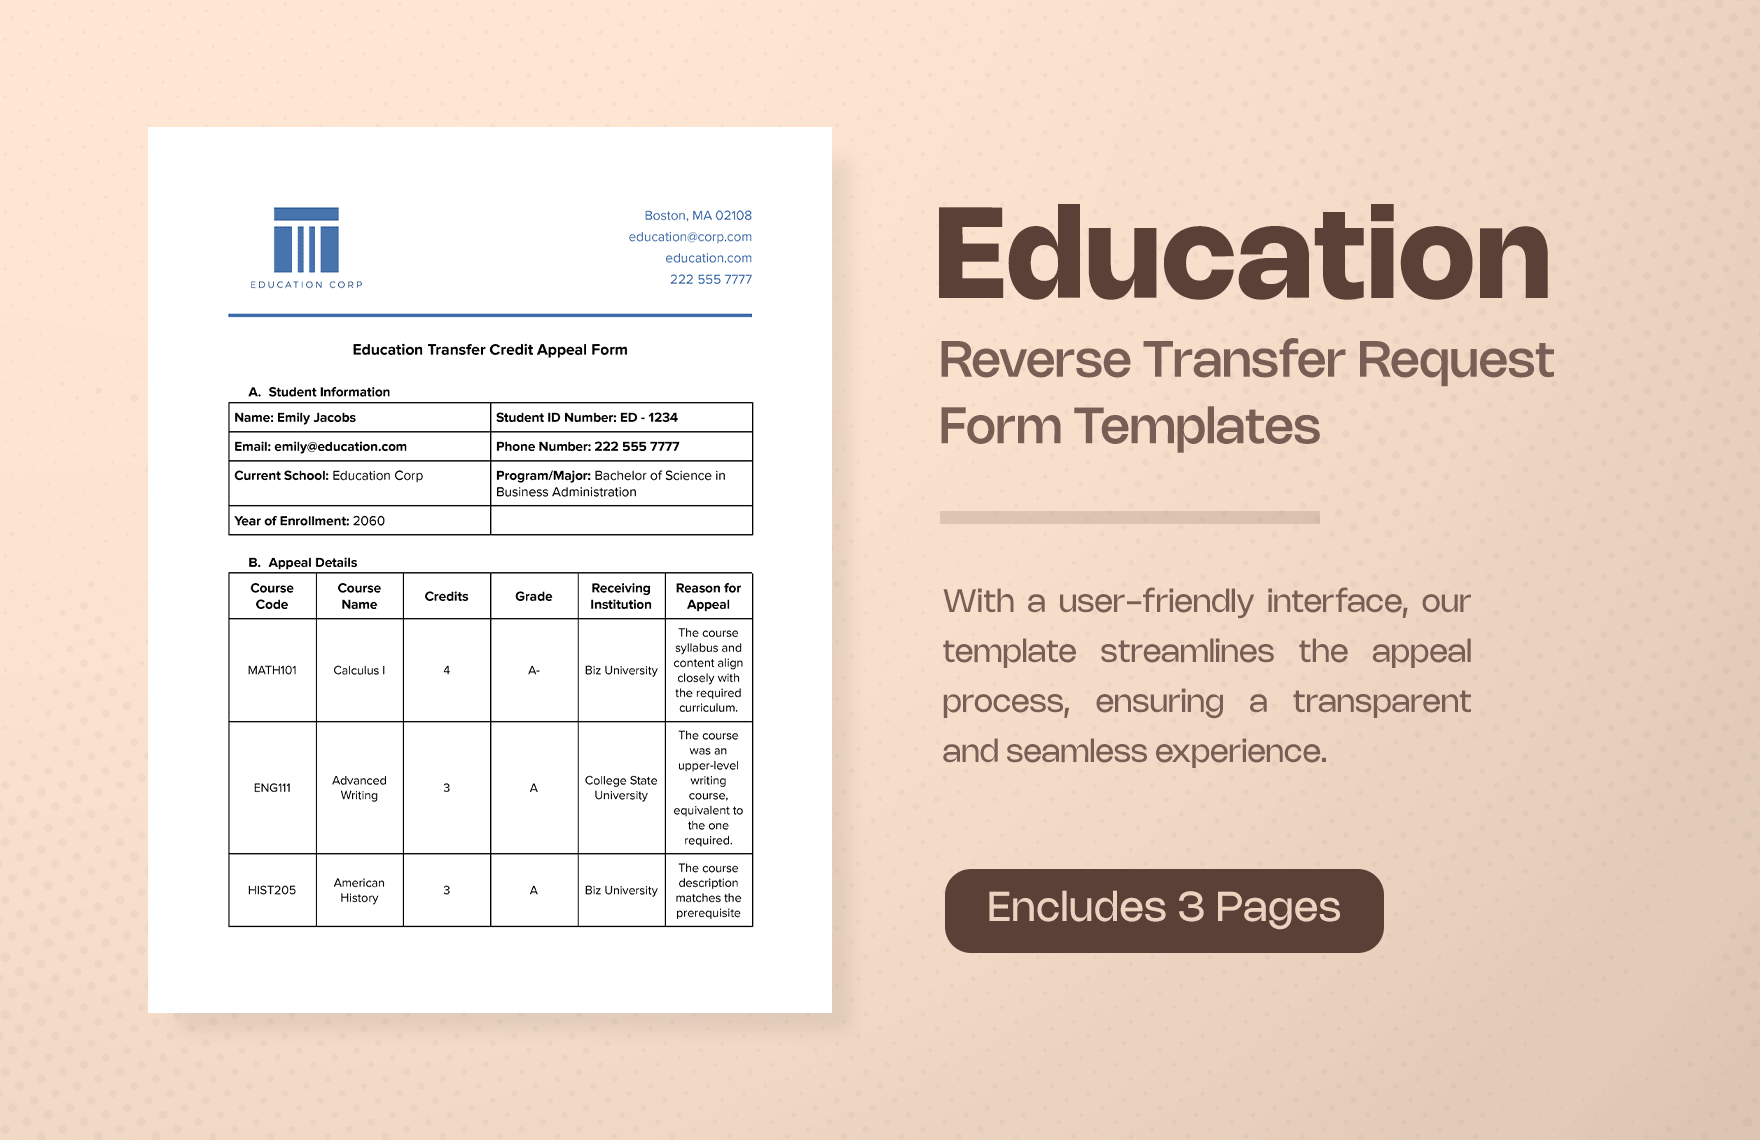 Education Transfer Credit Appeal Form Template